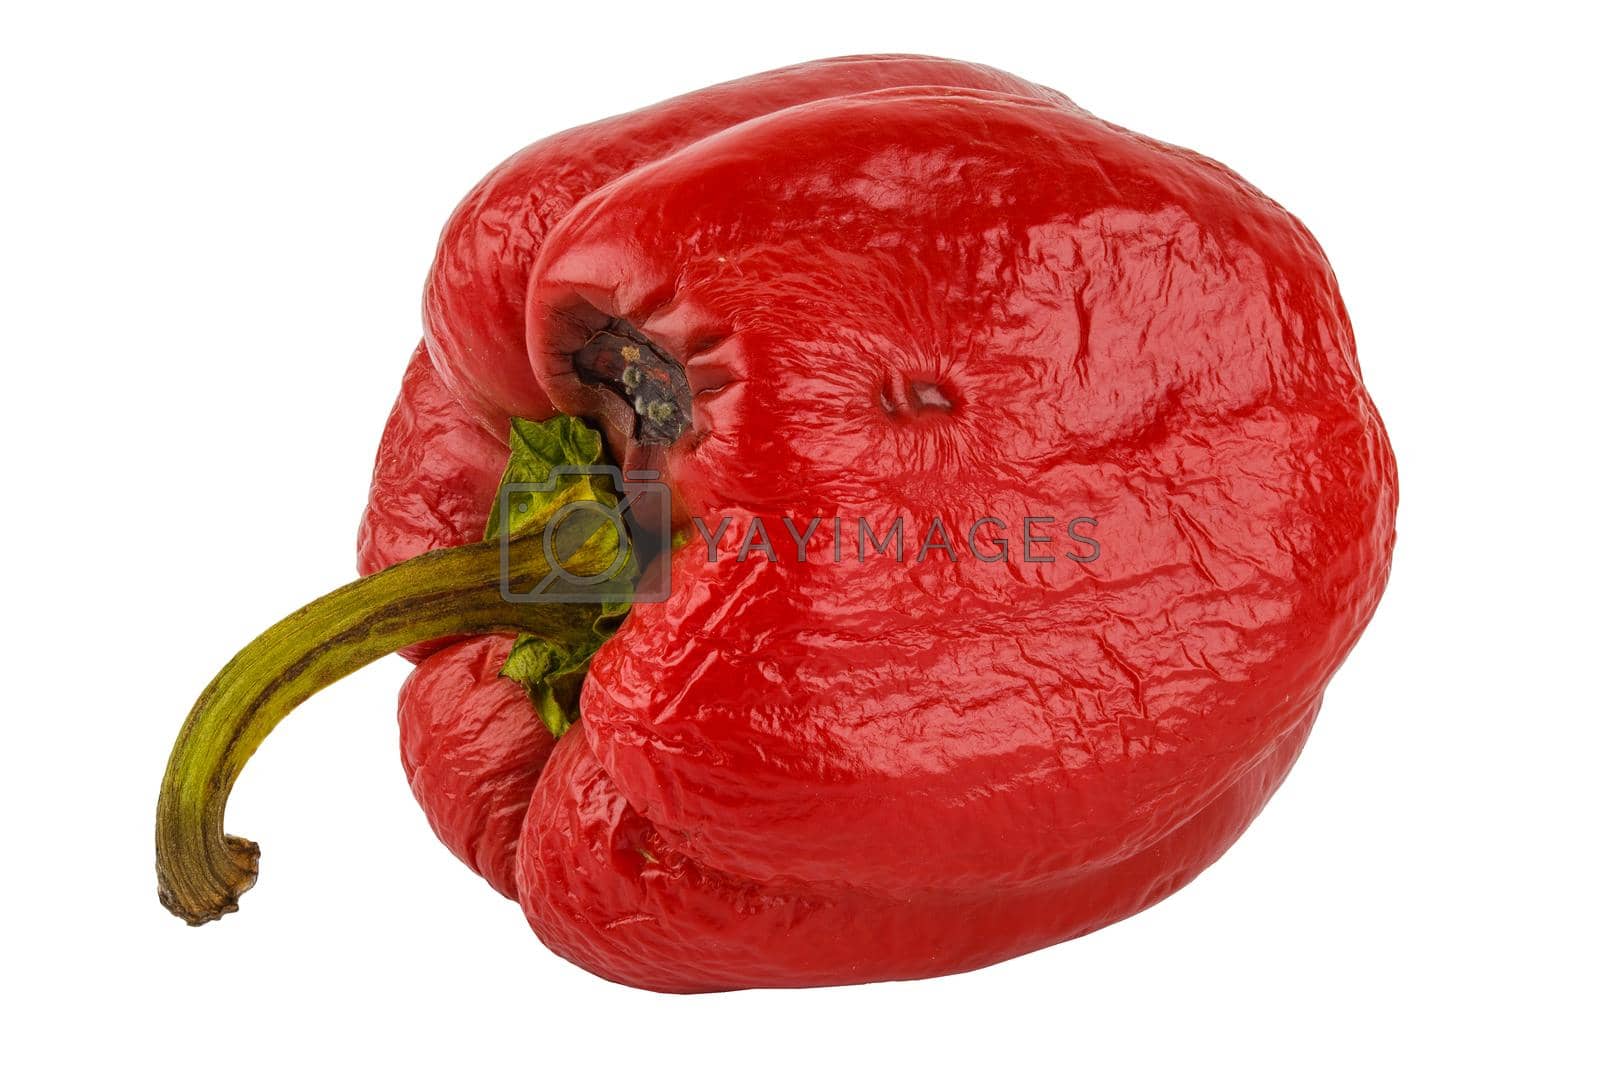 Royalty free image of rotten red bell pepper isolated on white background by z1b